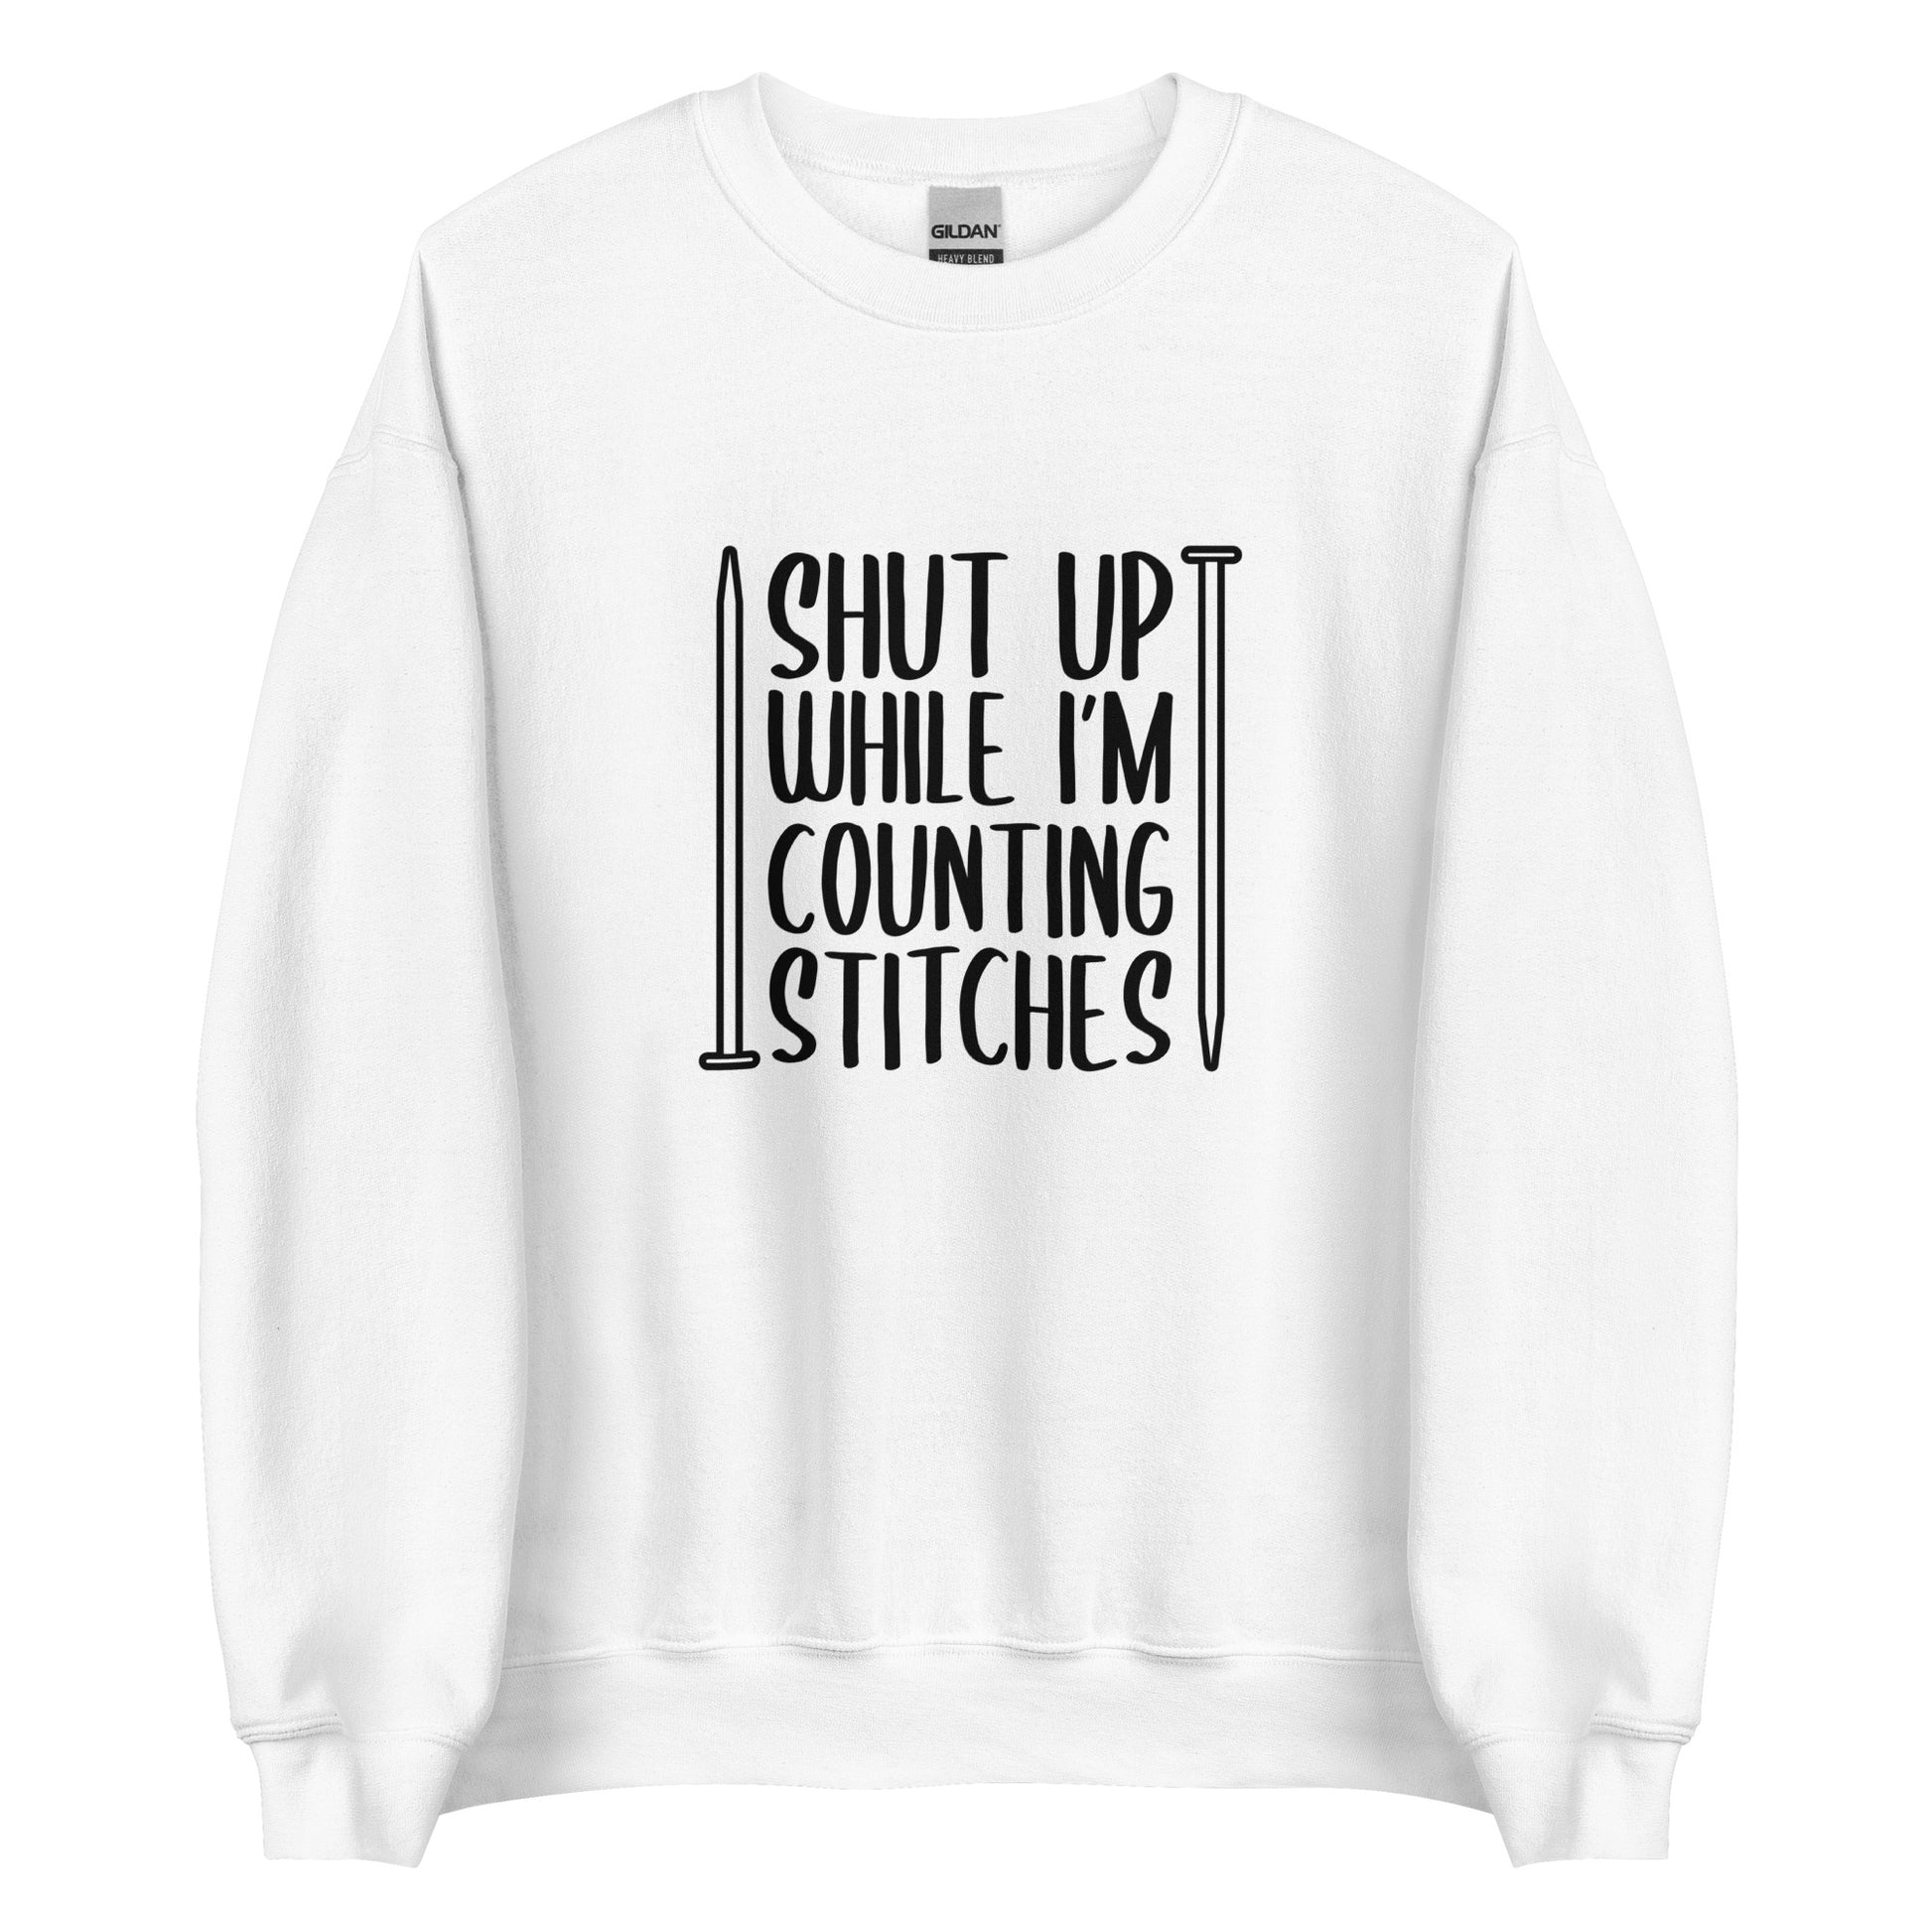 A white crewneck sweatshirt with black text surrounded by two knitting needles. The text reads "Shut up while I'm counting stiches".